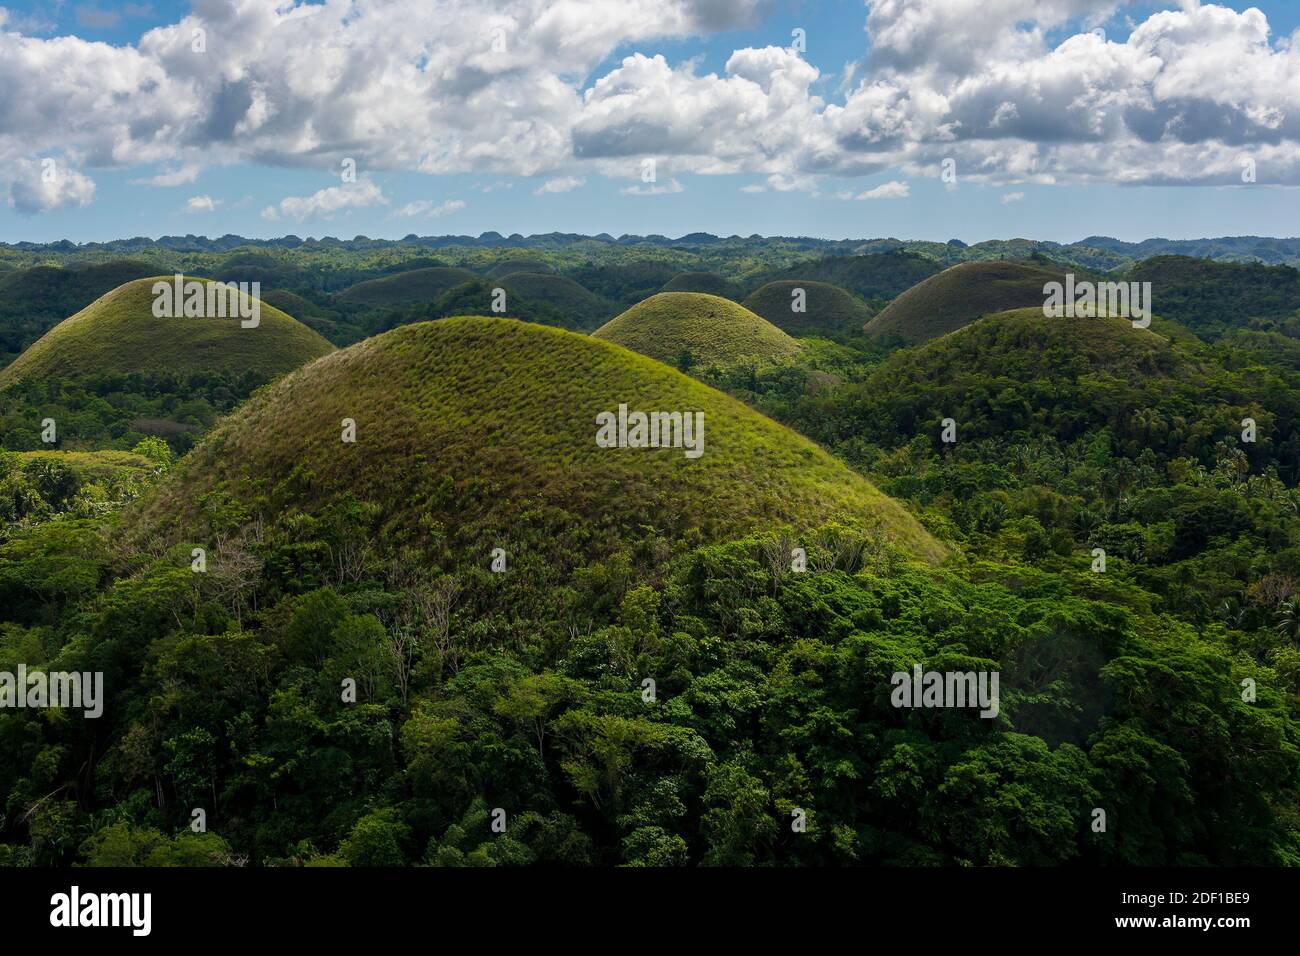 The Chocolate Hills are a geological formation in the Bohol province of the Philippines.They are covered in green grass that turns brown in summer. Stock Photo